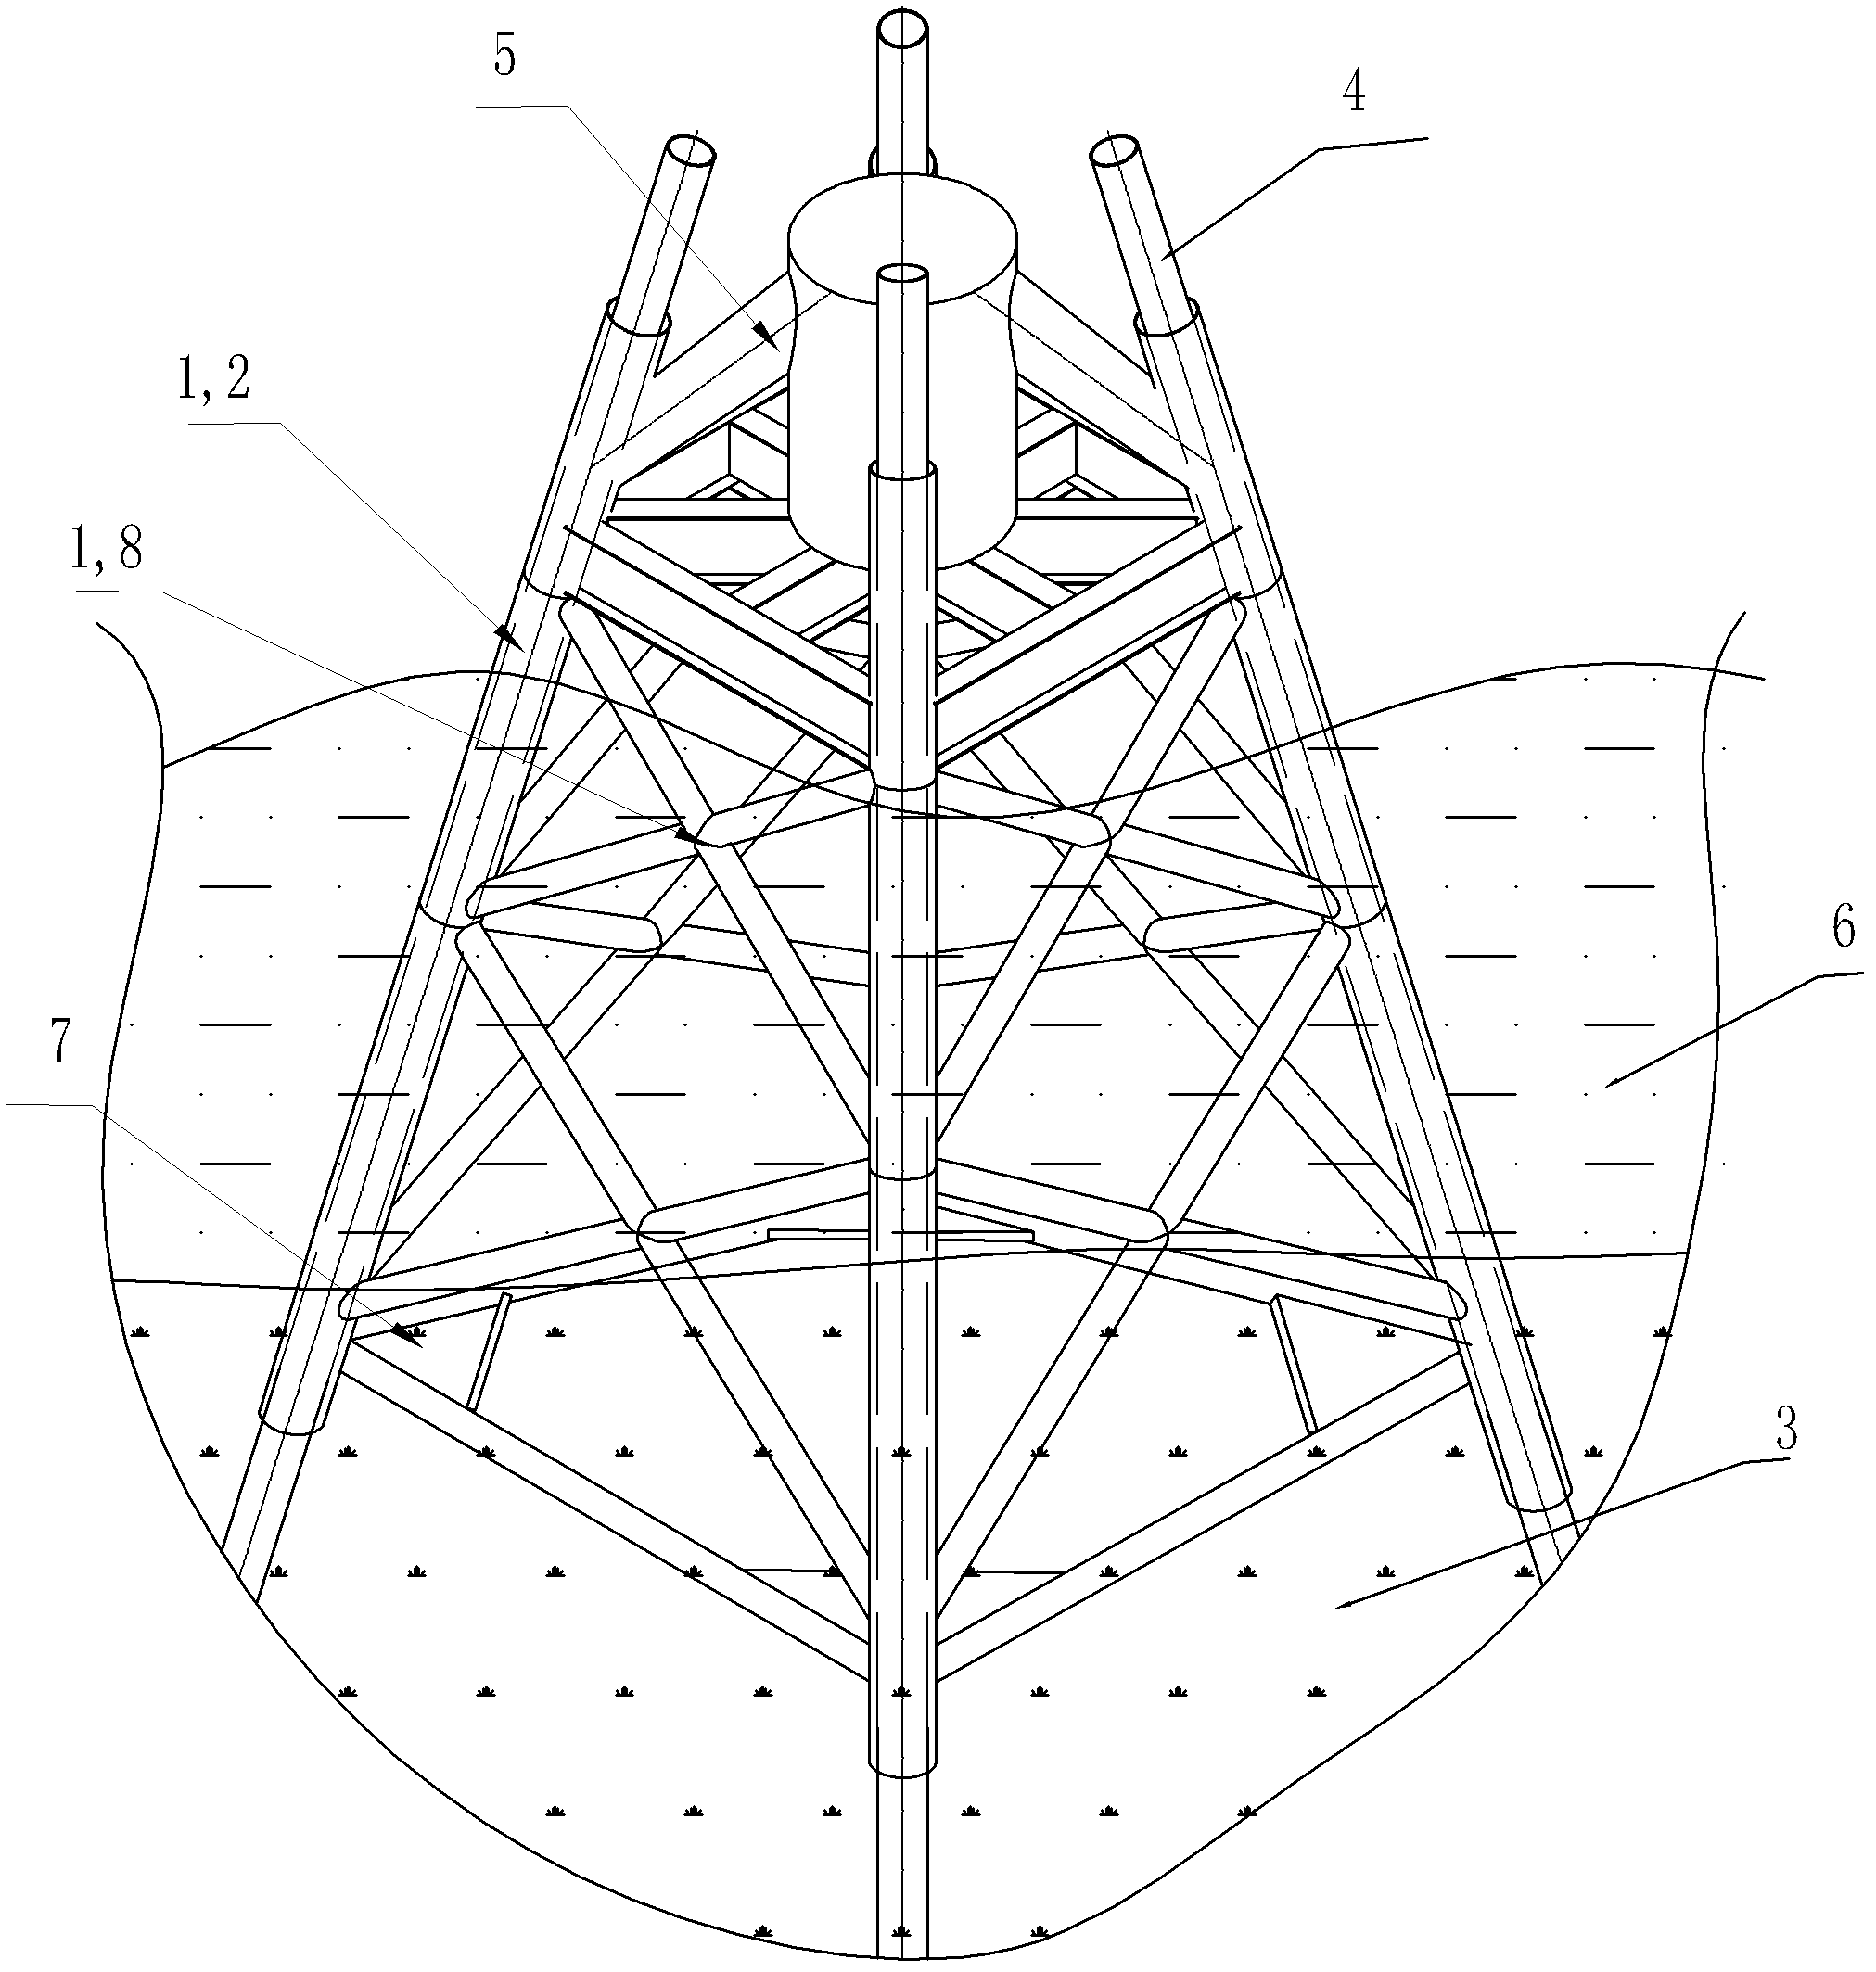 Basic mounting method of offshore fan jacket and integrated jacket device